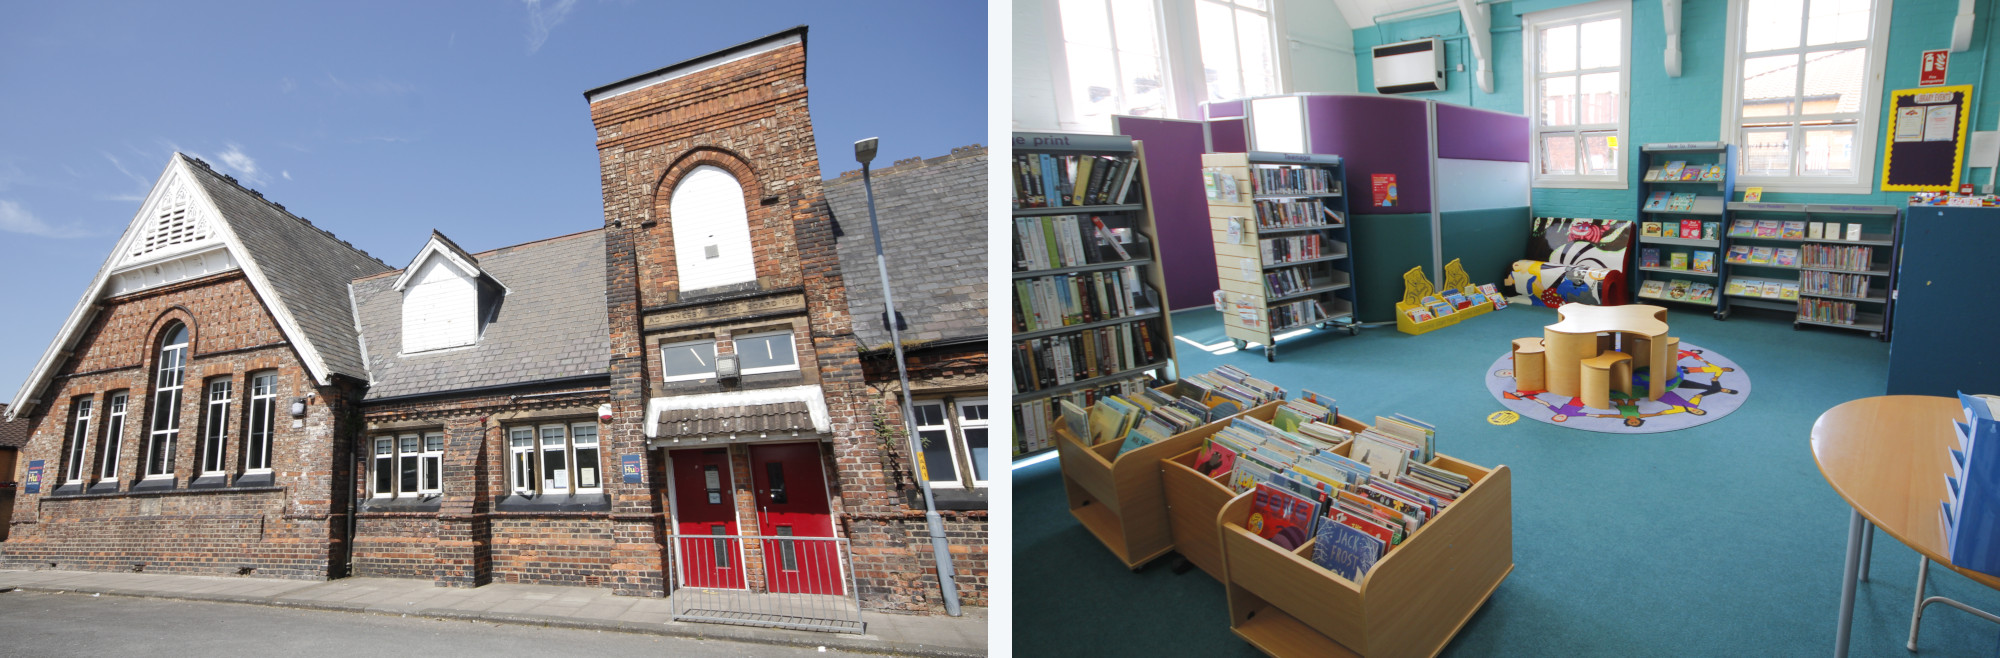 North Ormesby Community Hub and Library